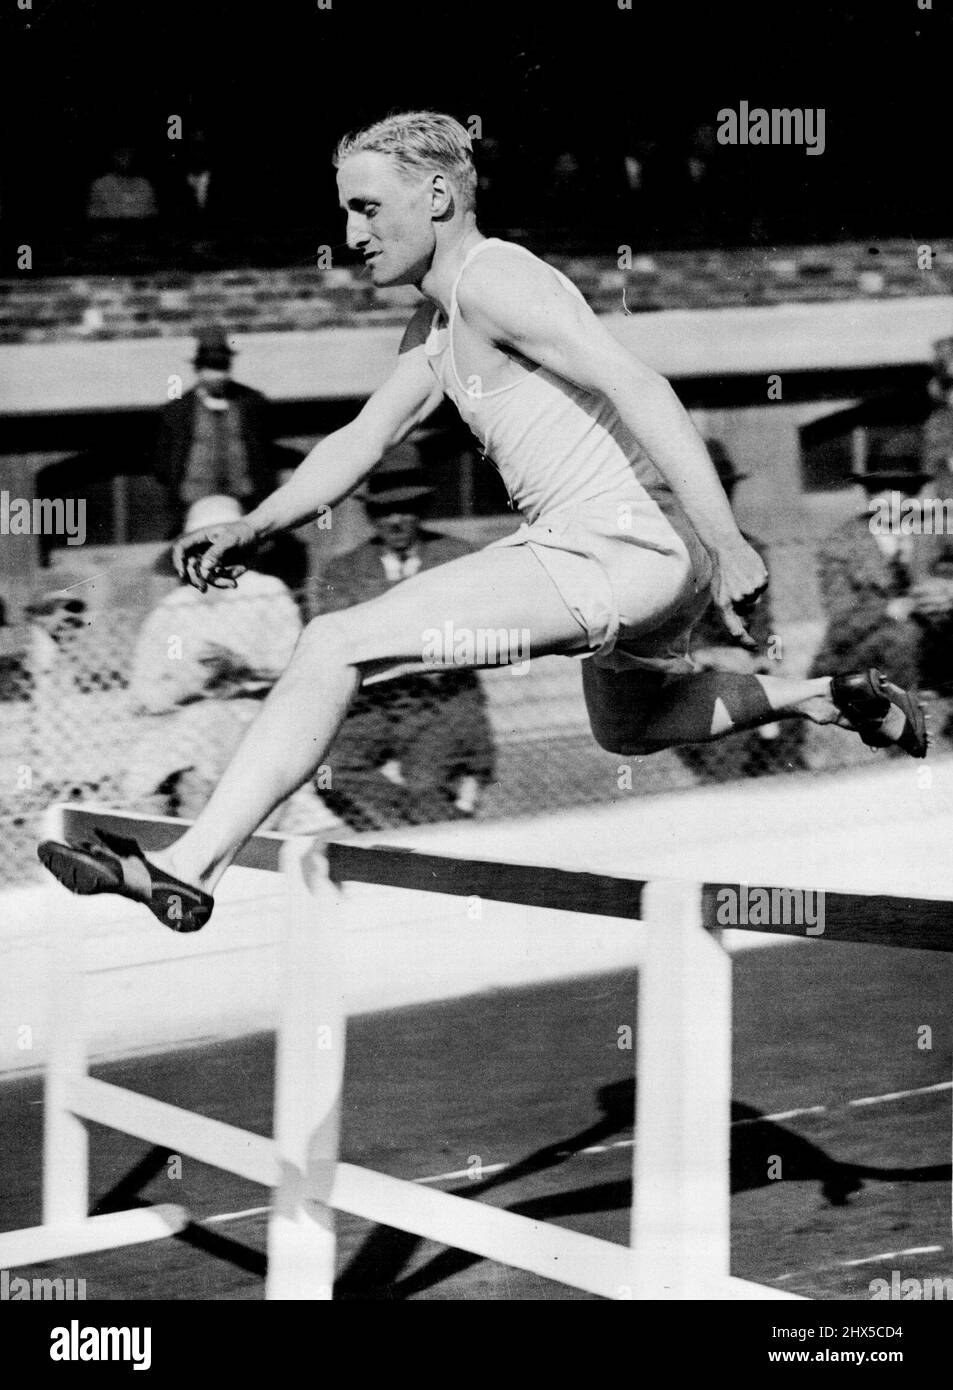 Prominent Athletes who will represent Great Britain in the Olympic Games at Los Angeles. Lord Burghley, the famous hurdler, and Captain of the team. Lord Burghley, formerly England's Hurdle star, now keen administrator. December 8, 1932. (Photo by Sports & General Press Agency, Ltd.). Stock Photo